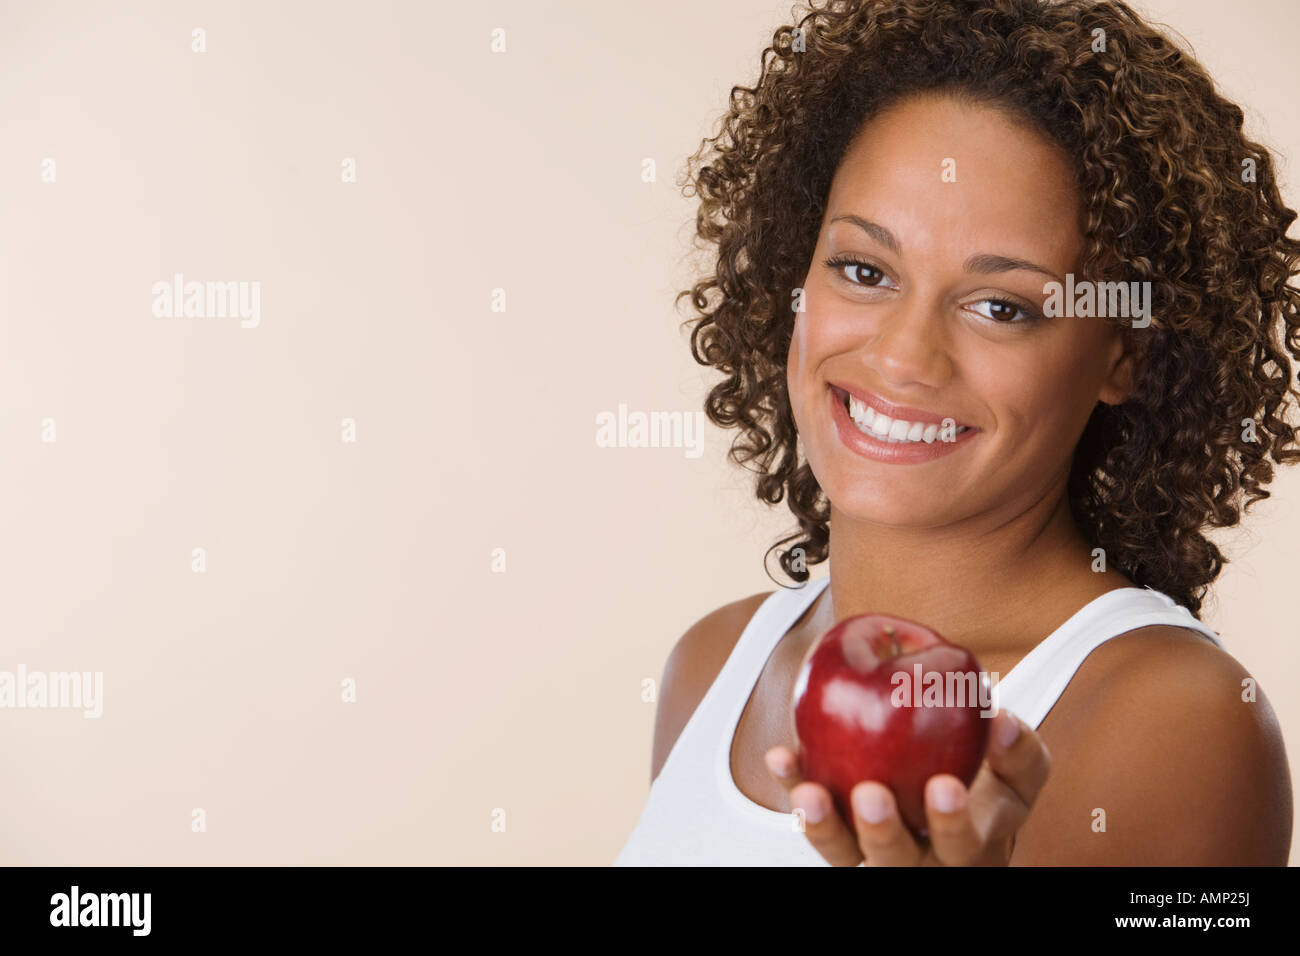 African woman holding apple Stock Photo